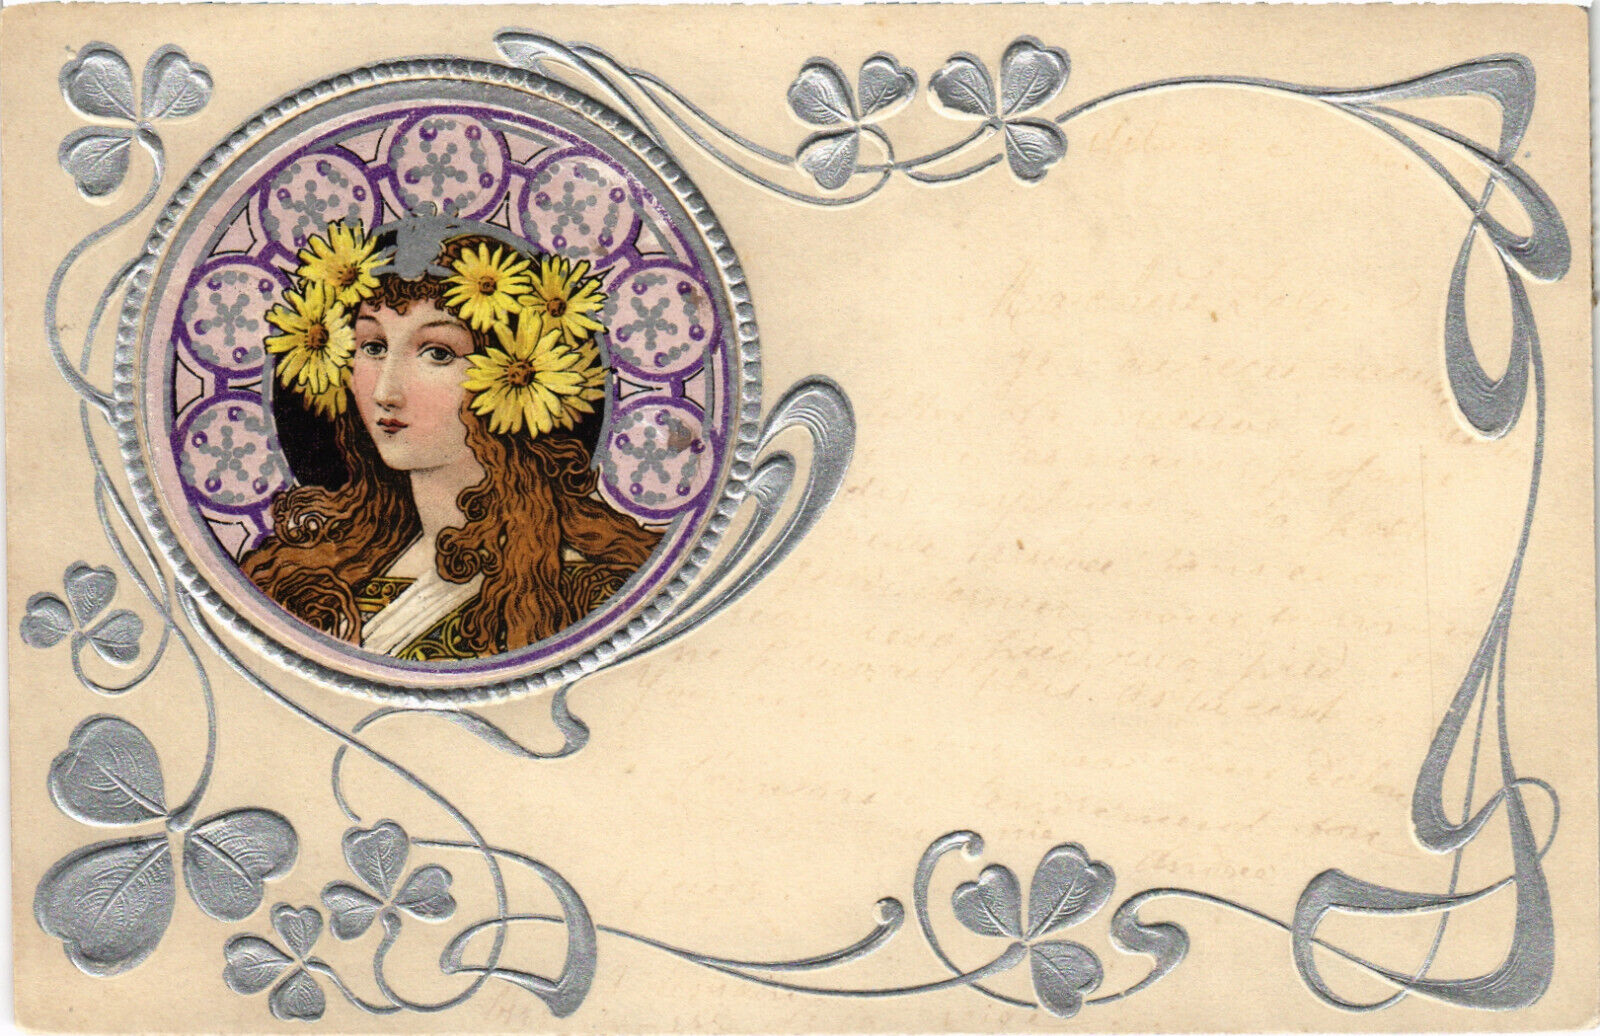 PC ARTIST SIGNED, ART NOUVEAU, MUCH STYLE, Vintage EMBOSSED Postcard (b49370)